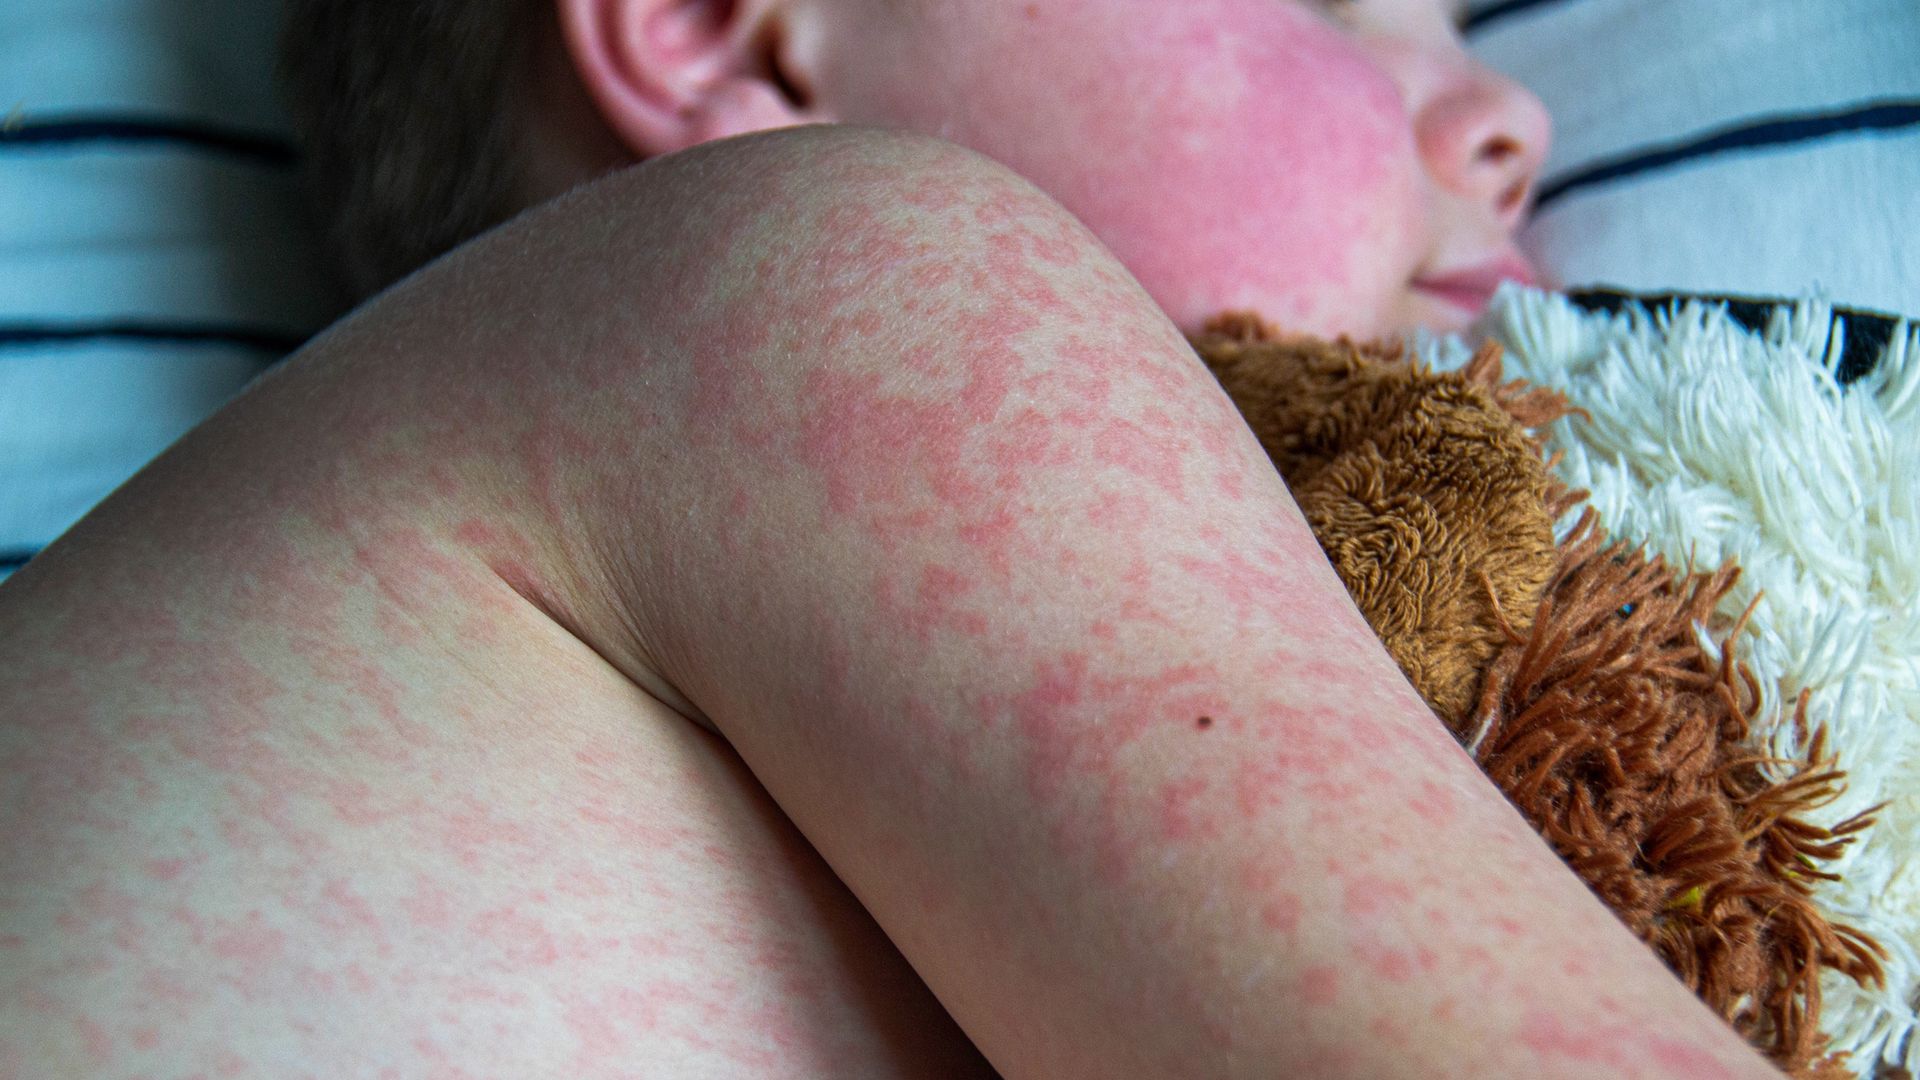 Measles cases worldwide almost double in a year - as England faces measles 'emergency'